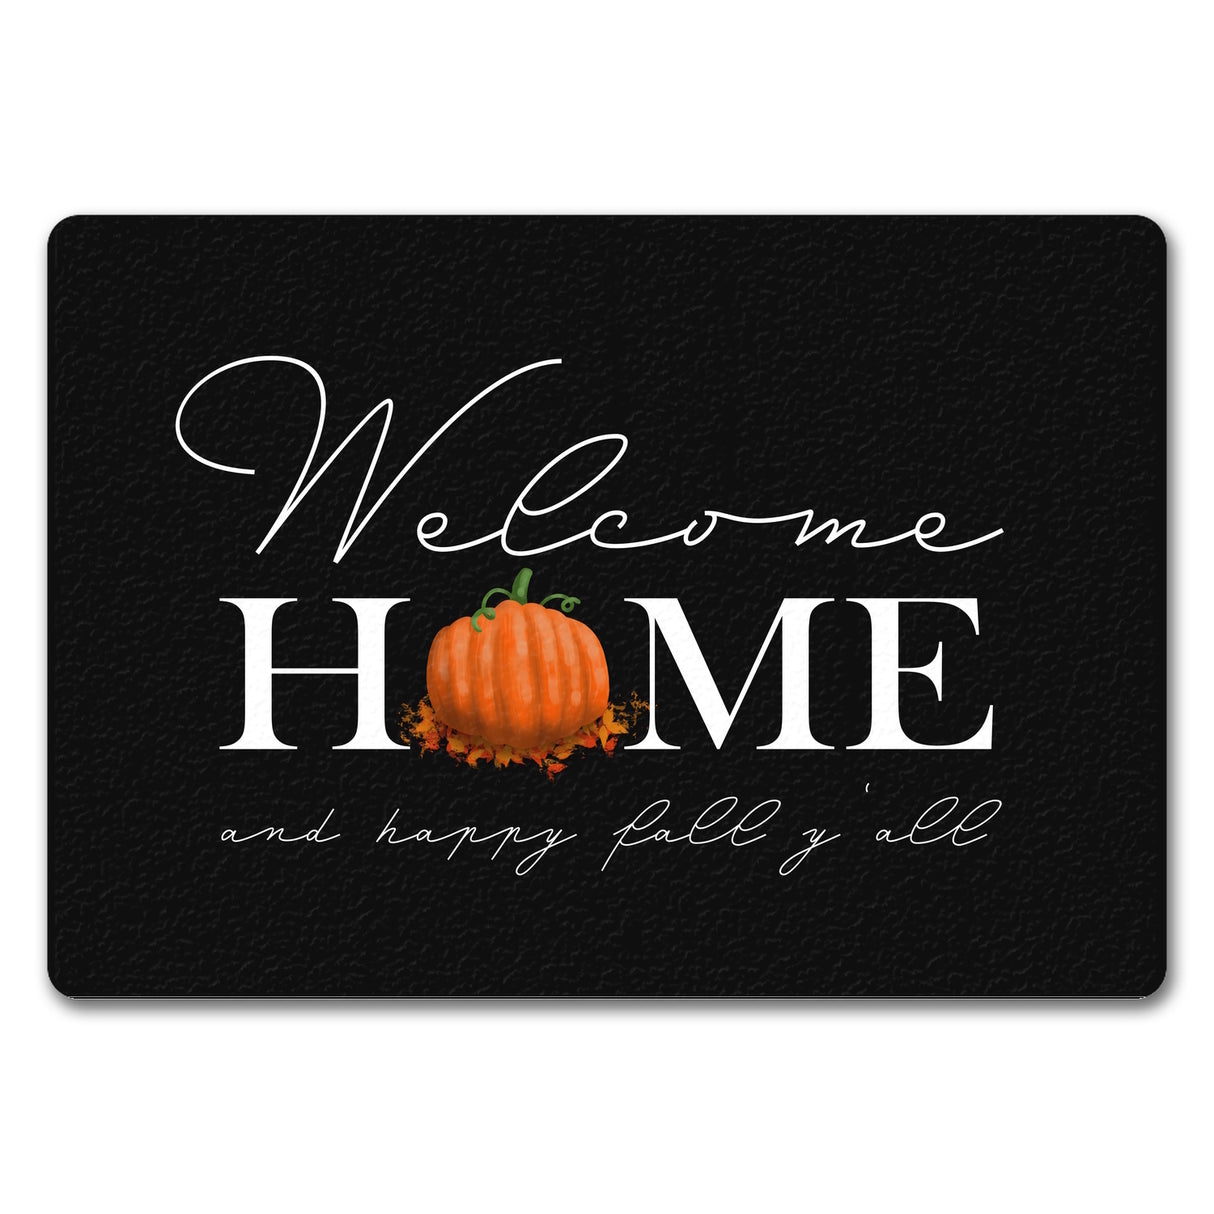 Welcome home Kürbis Fußmatte in 35x50 cm mit Spruch - and happy fall y'all